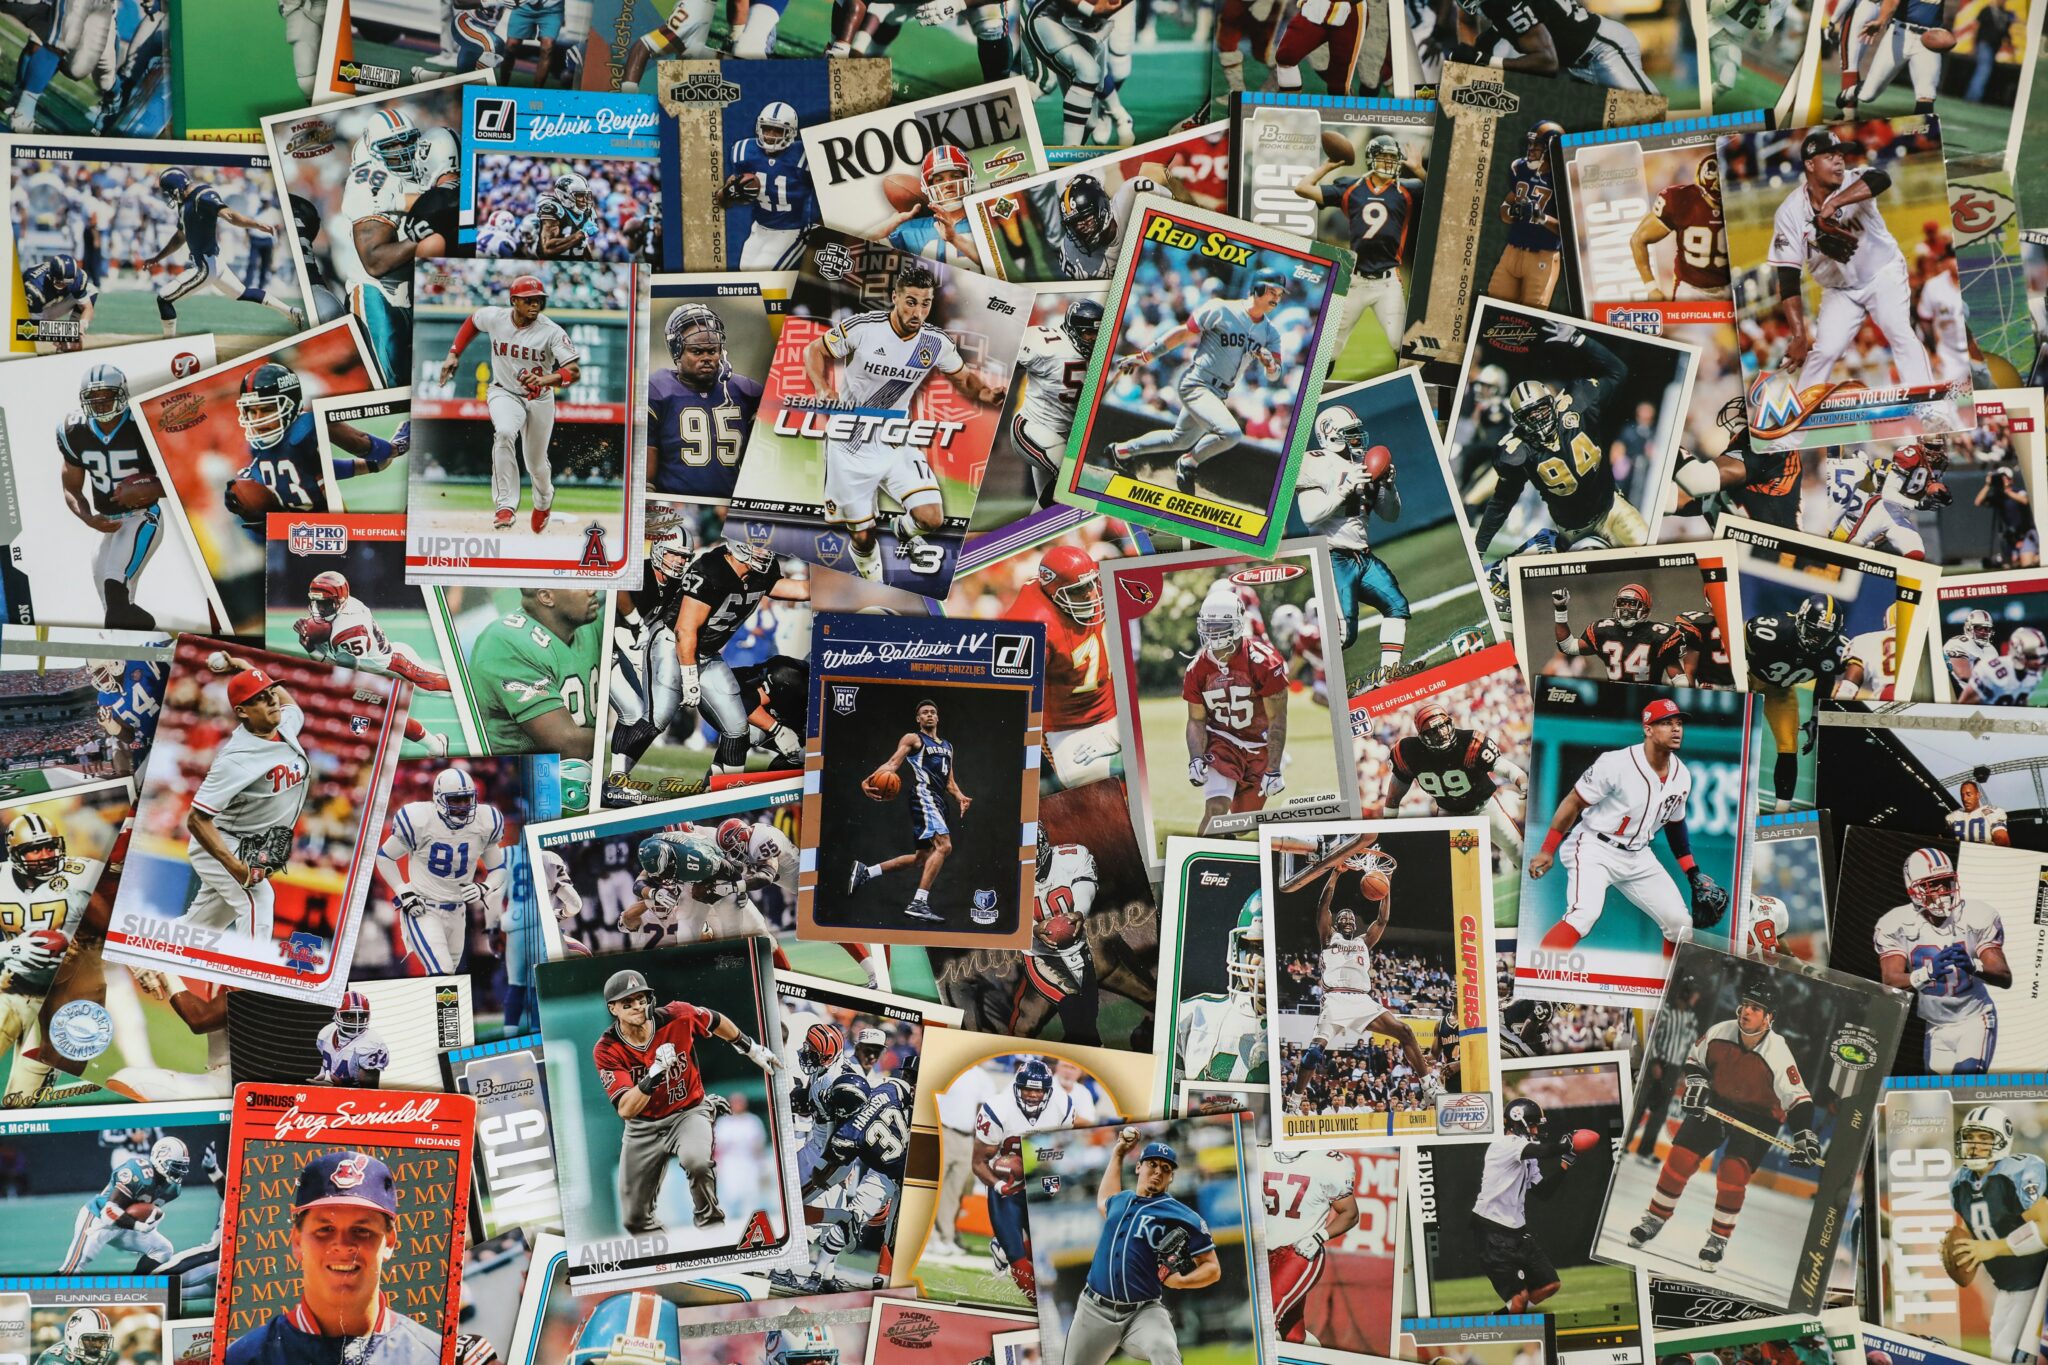 Topps trading cards acquired by Fanatics